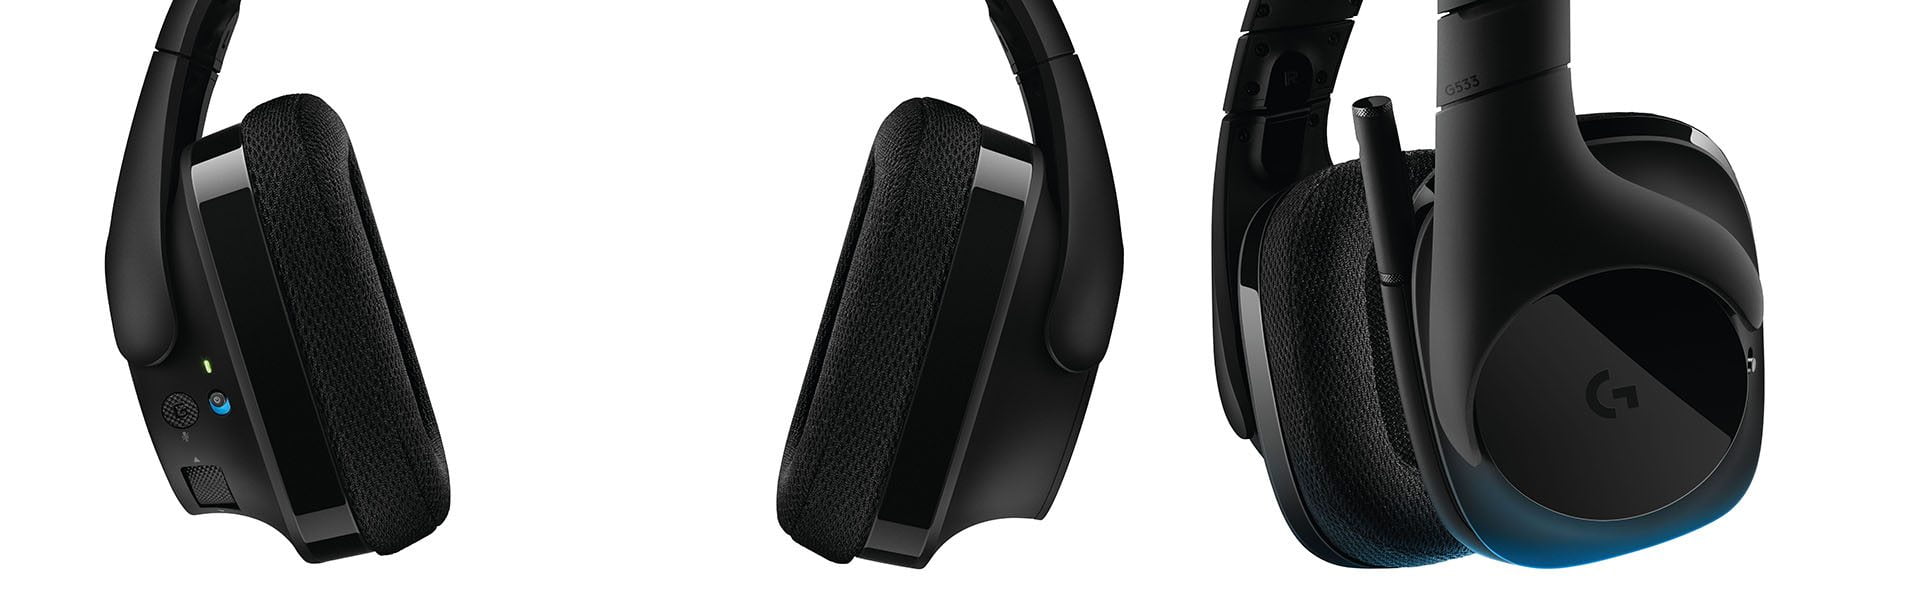 Logitech G Introduces New PC Wireless Gaming Headset 21